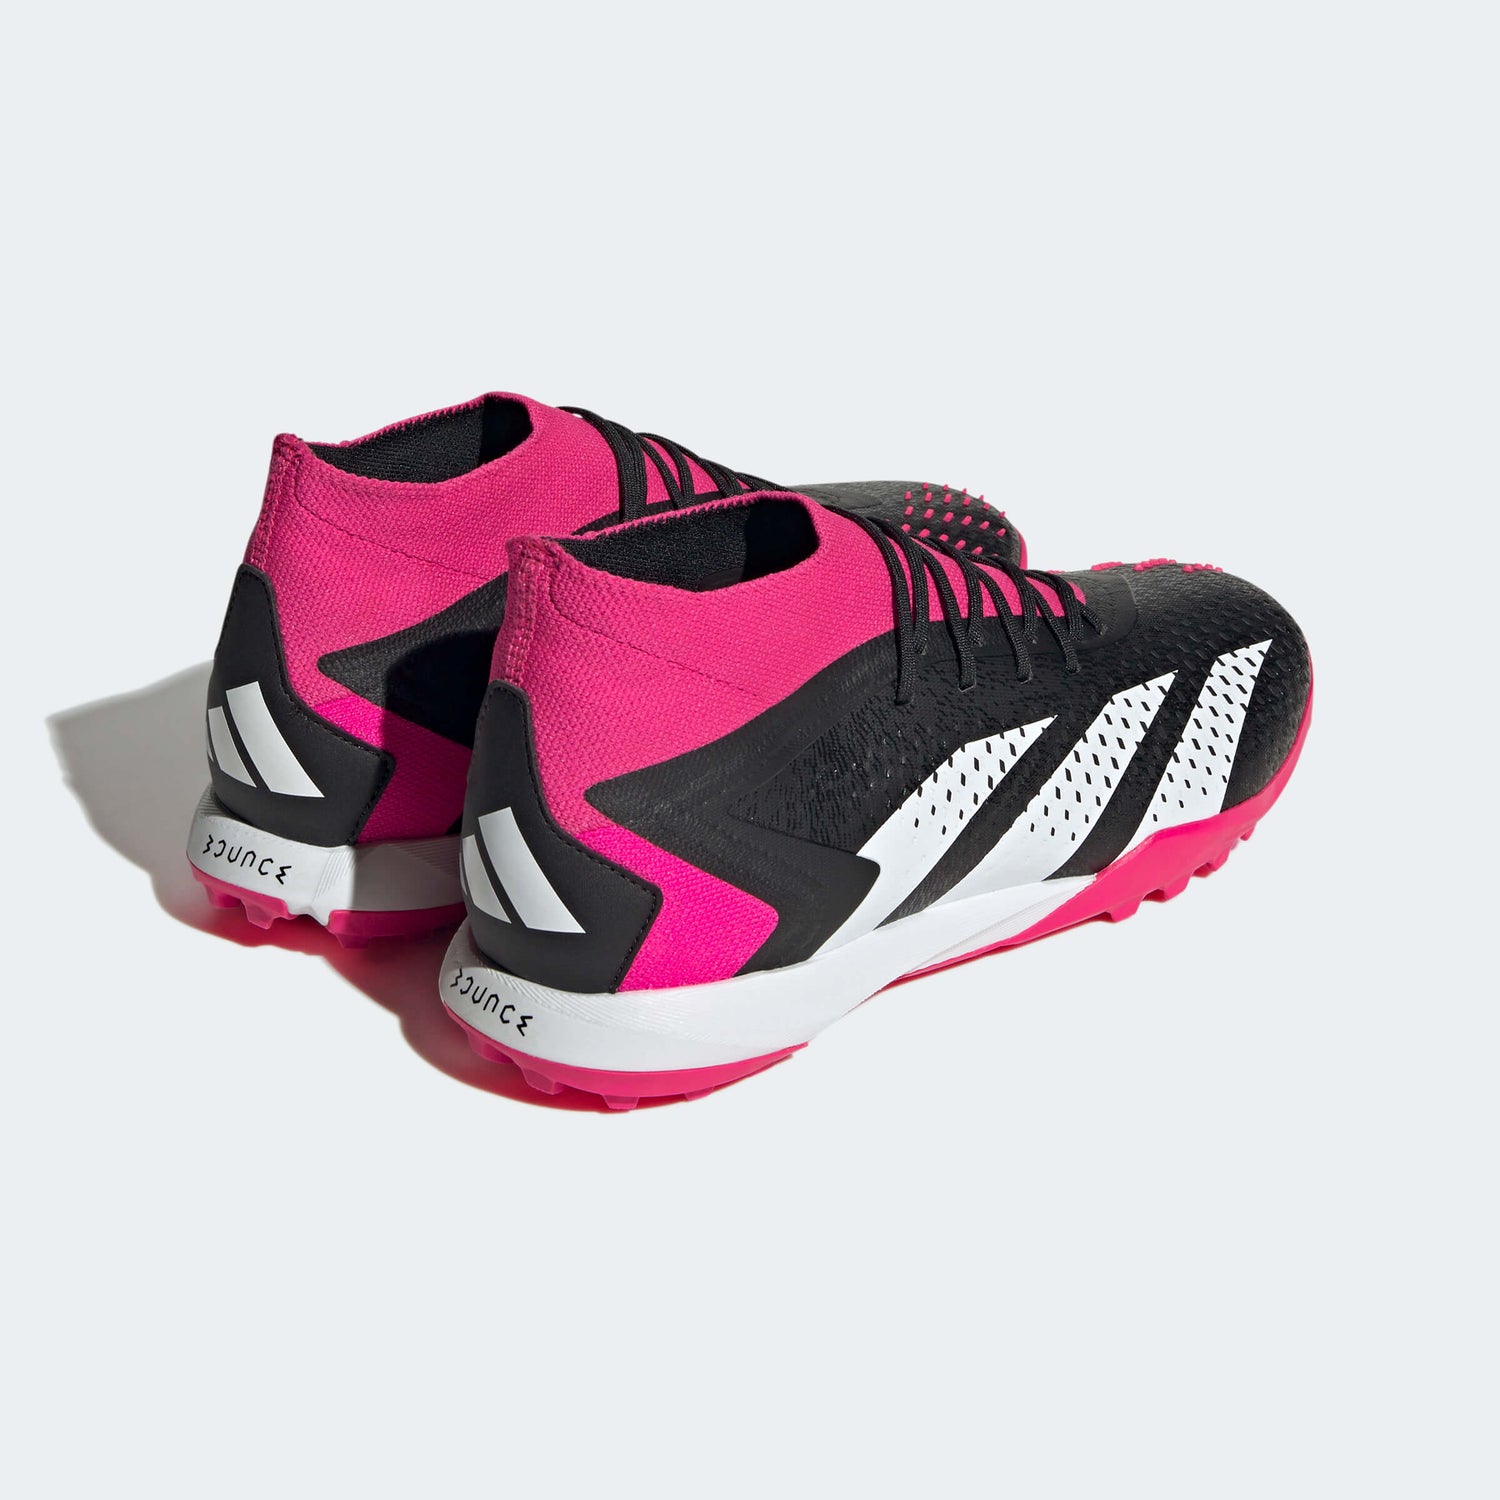 Adidas Predator Accuracy.1 Turf - Own Your Football (SP23) (Pair - Back Lateral)